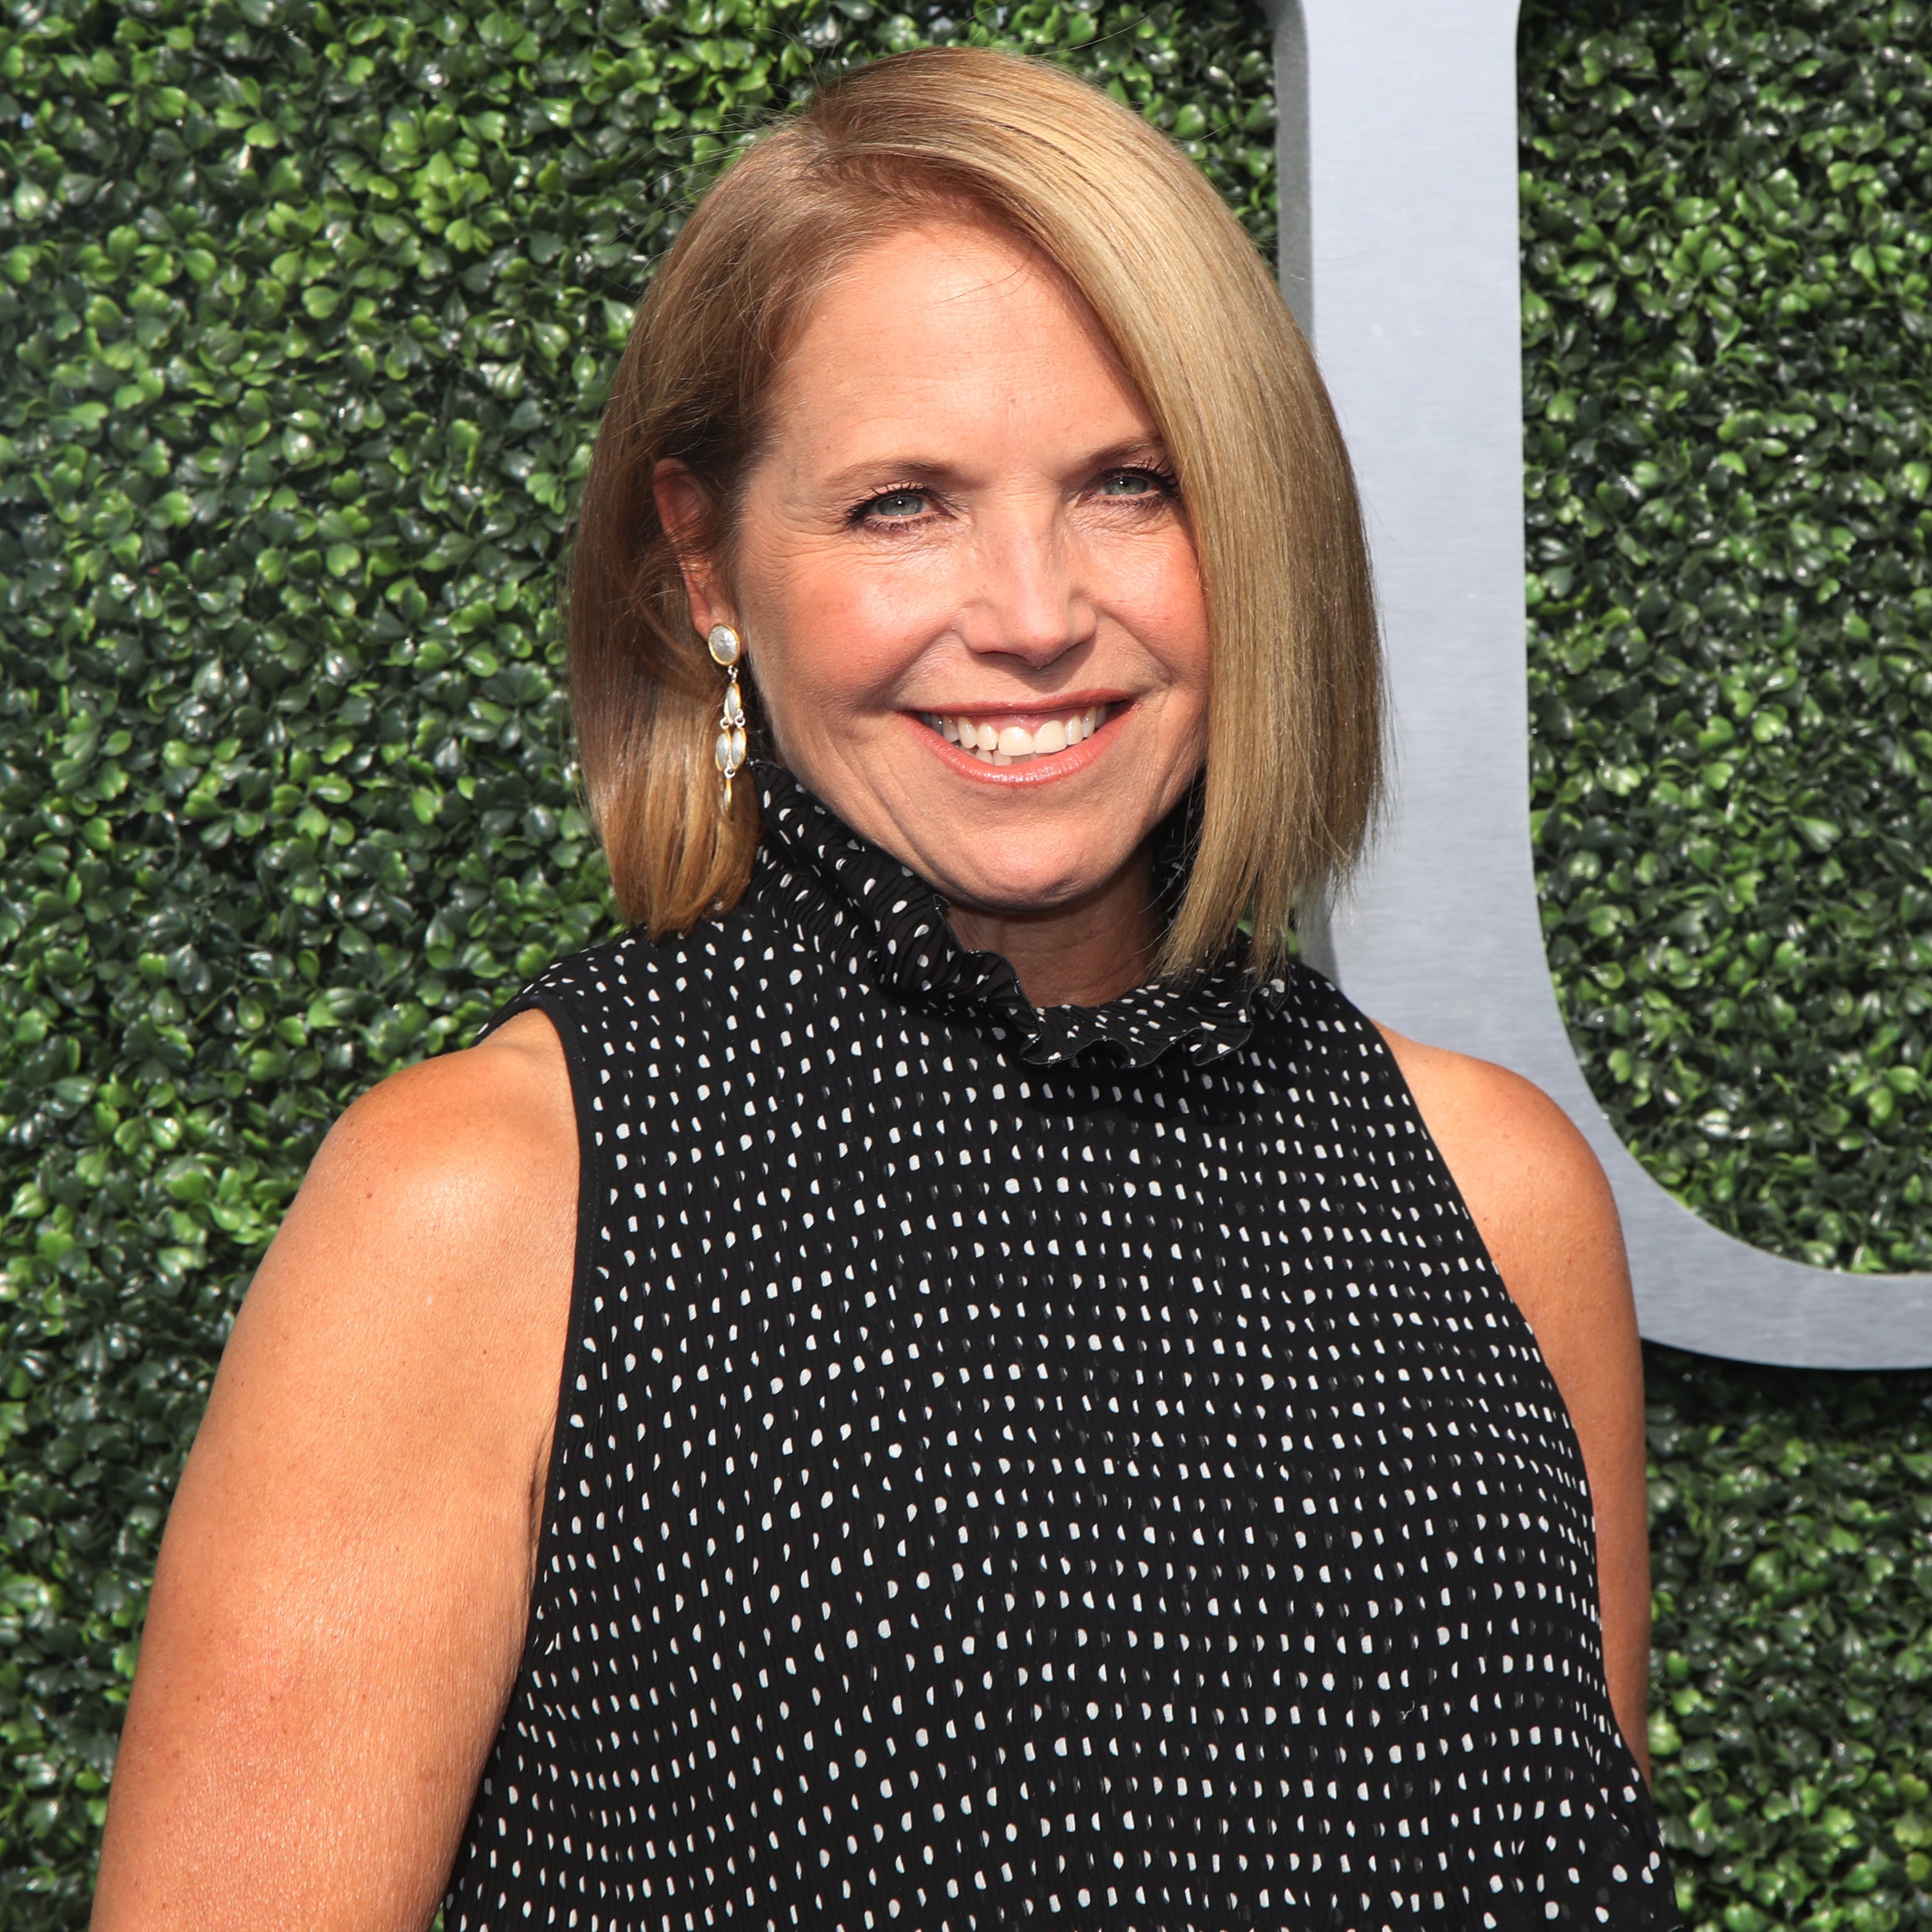 Katie Couric on the blue carpet before US Open 2017 opening night ceremony at Tennis Center in New York | Photo: Shutterstock